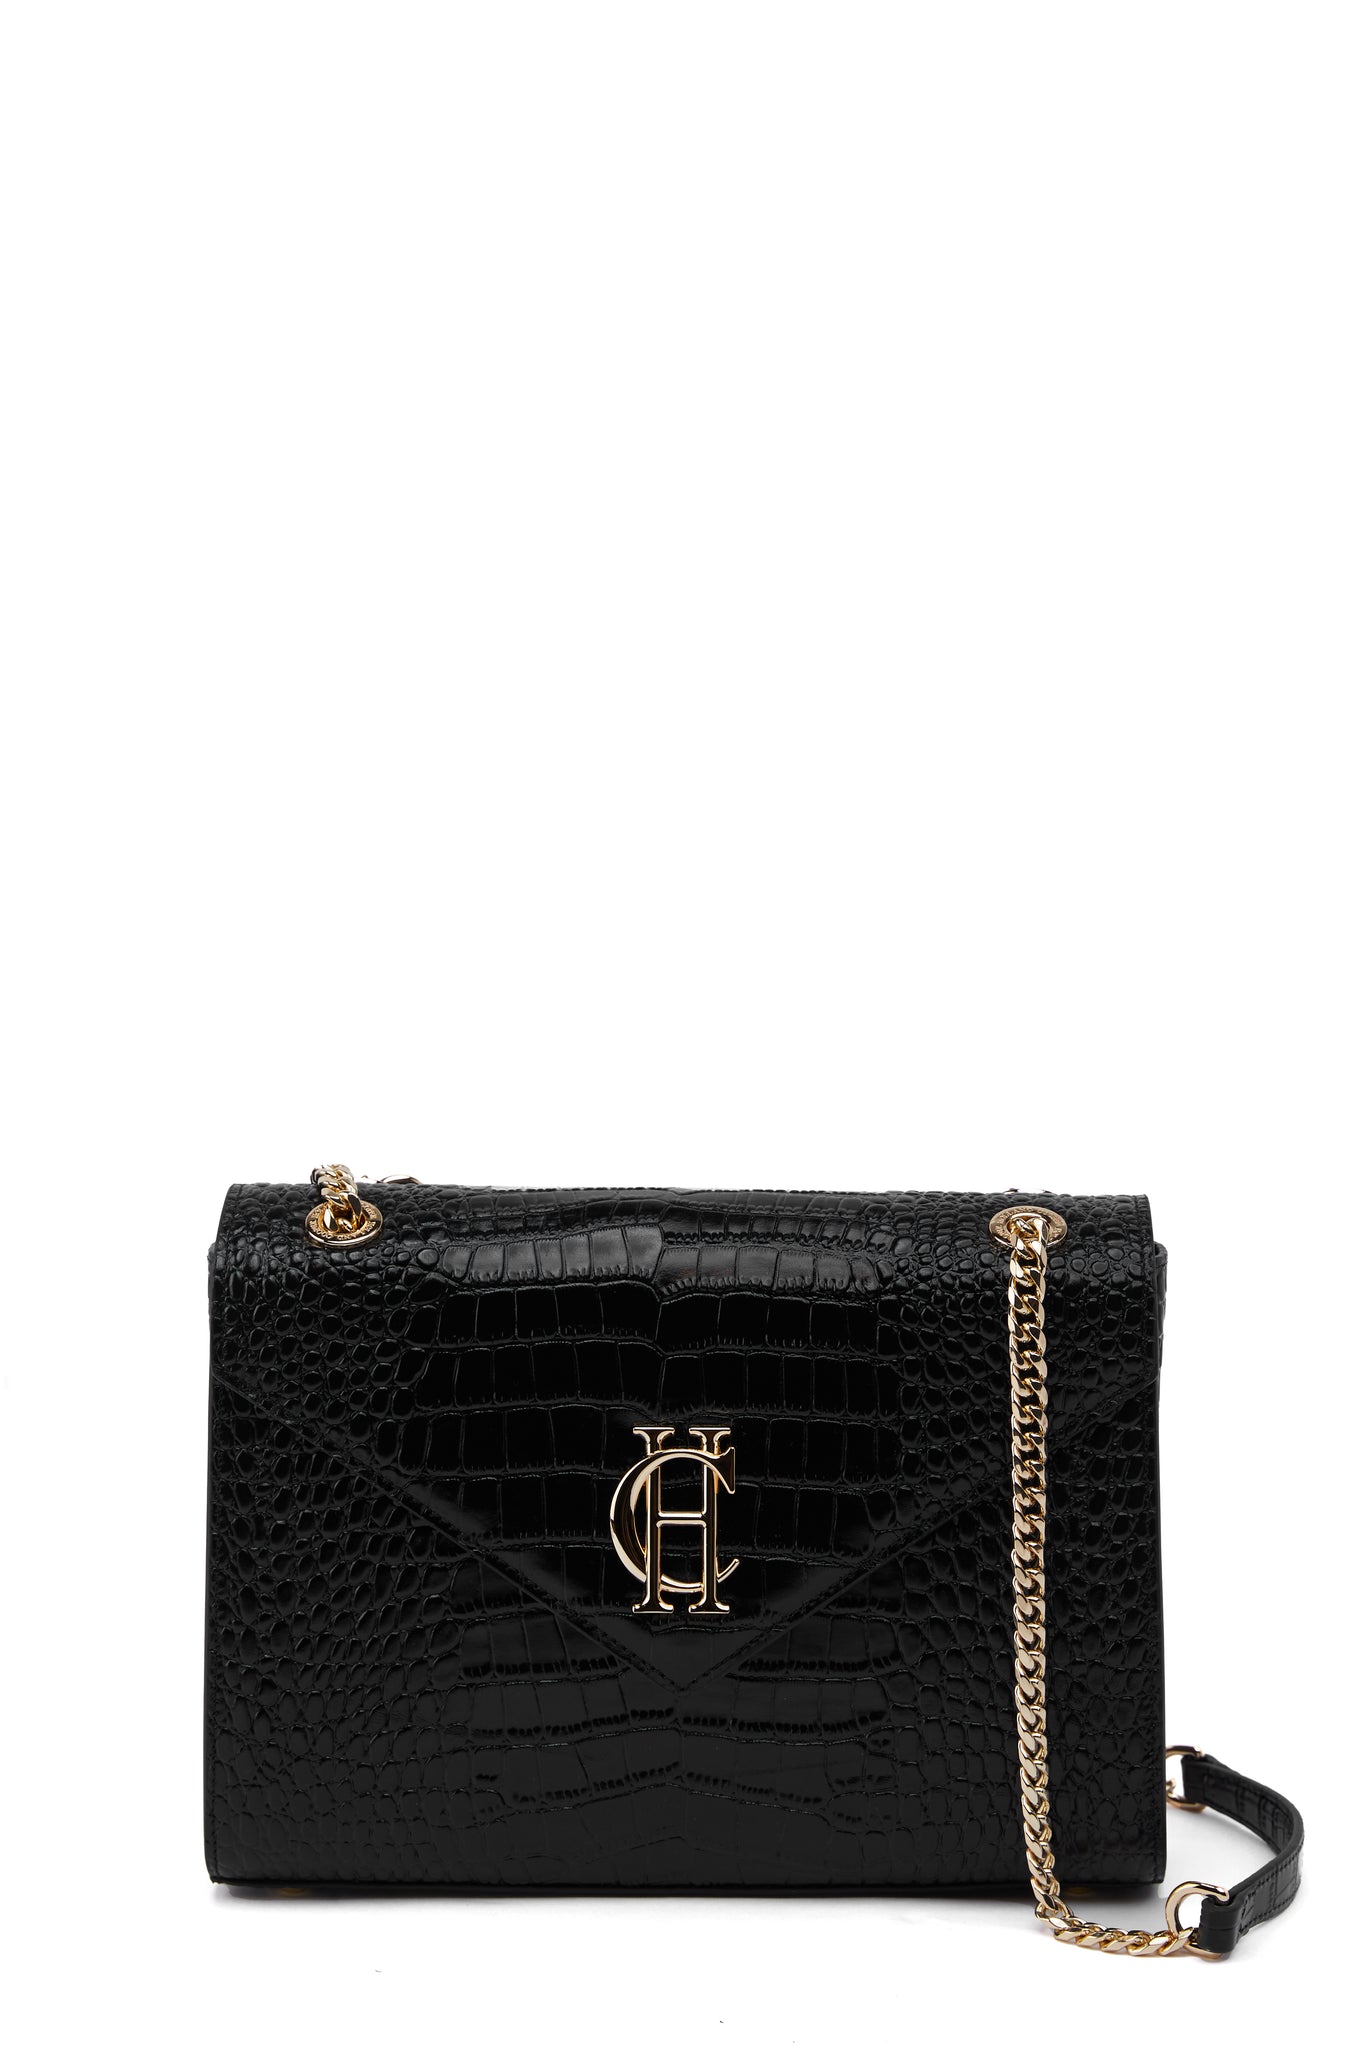 front of black croc embossed leather shoulder bag with gold hardware and chain